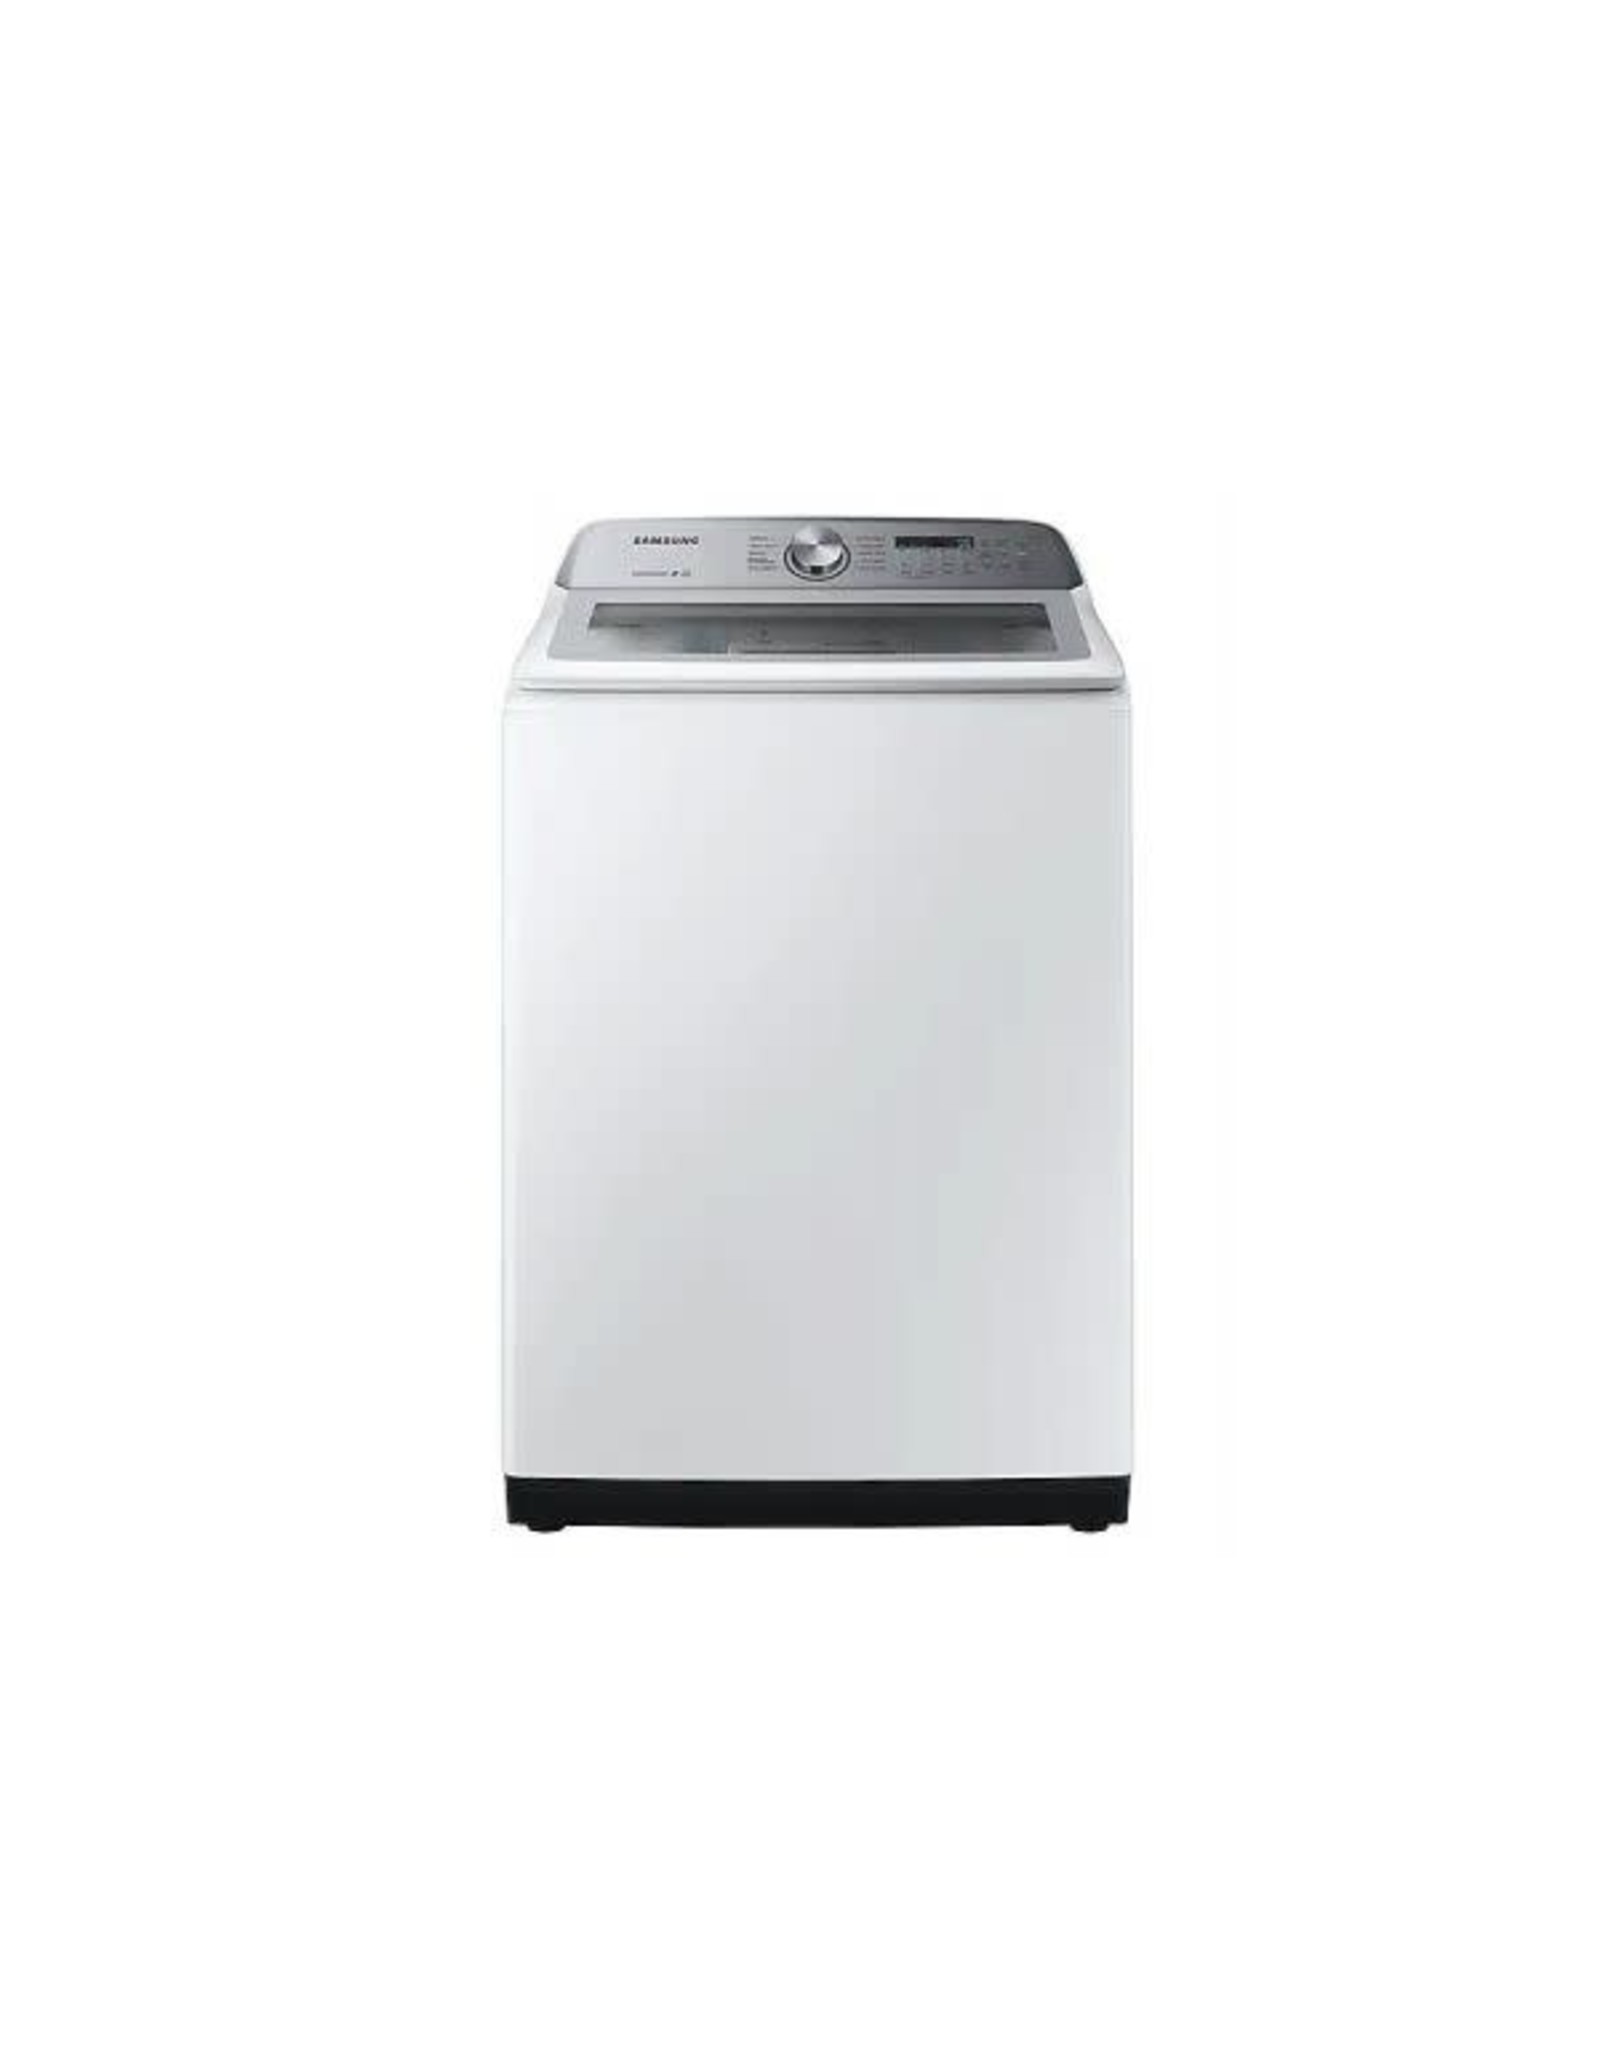 WA50R200AW  5.0 cu. ft. Hi-Efficiency White Top Load Washing Machine with Active Water Jet, ENERGY STAR